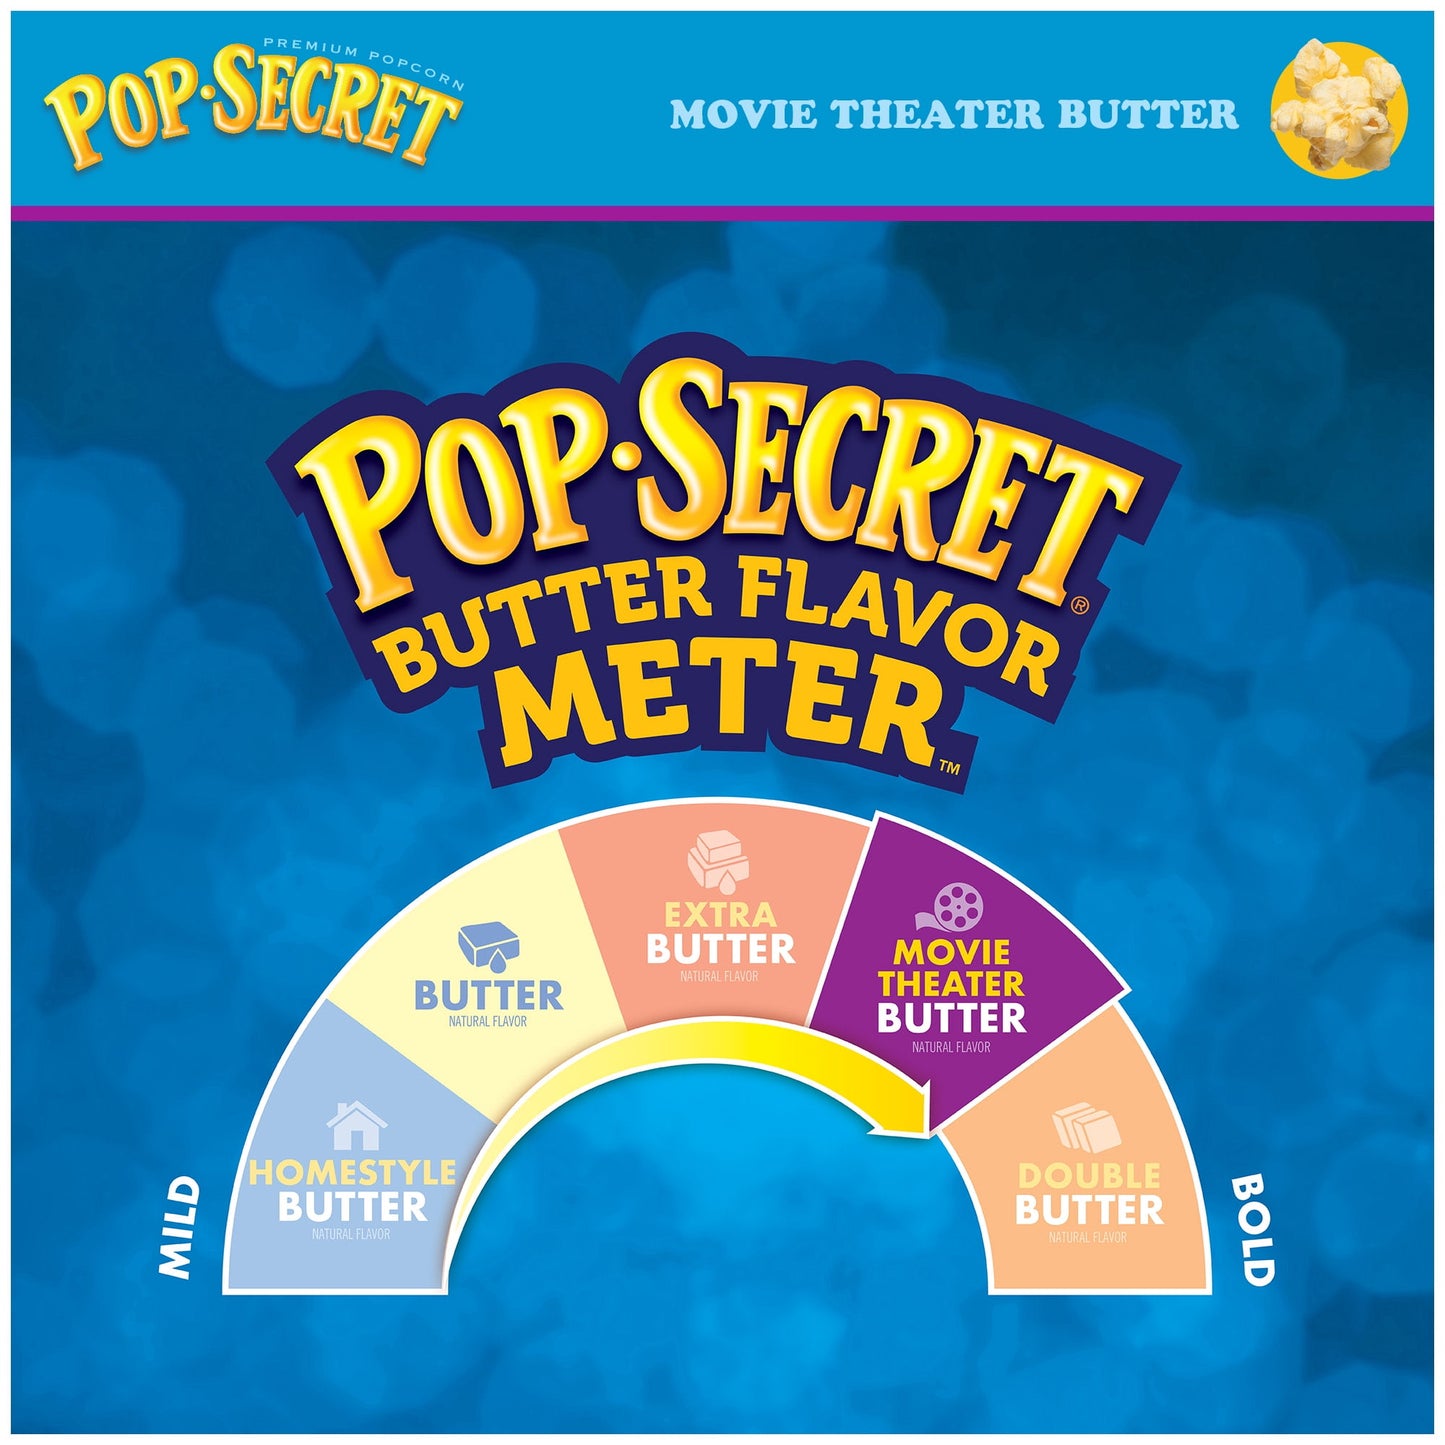 Pop Secret Microwave Popcorn, Movie Theater Butter Flavor, 3.2 oz Sharing Bags, 3 Ct